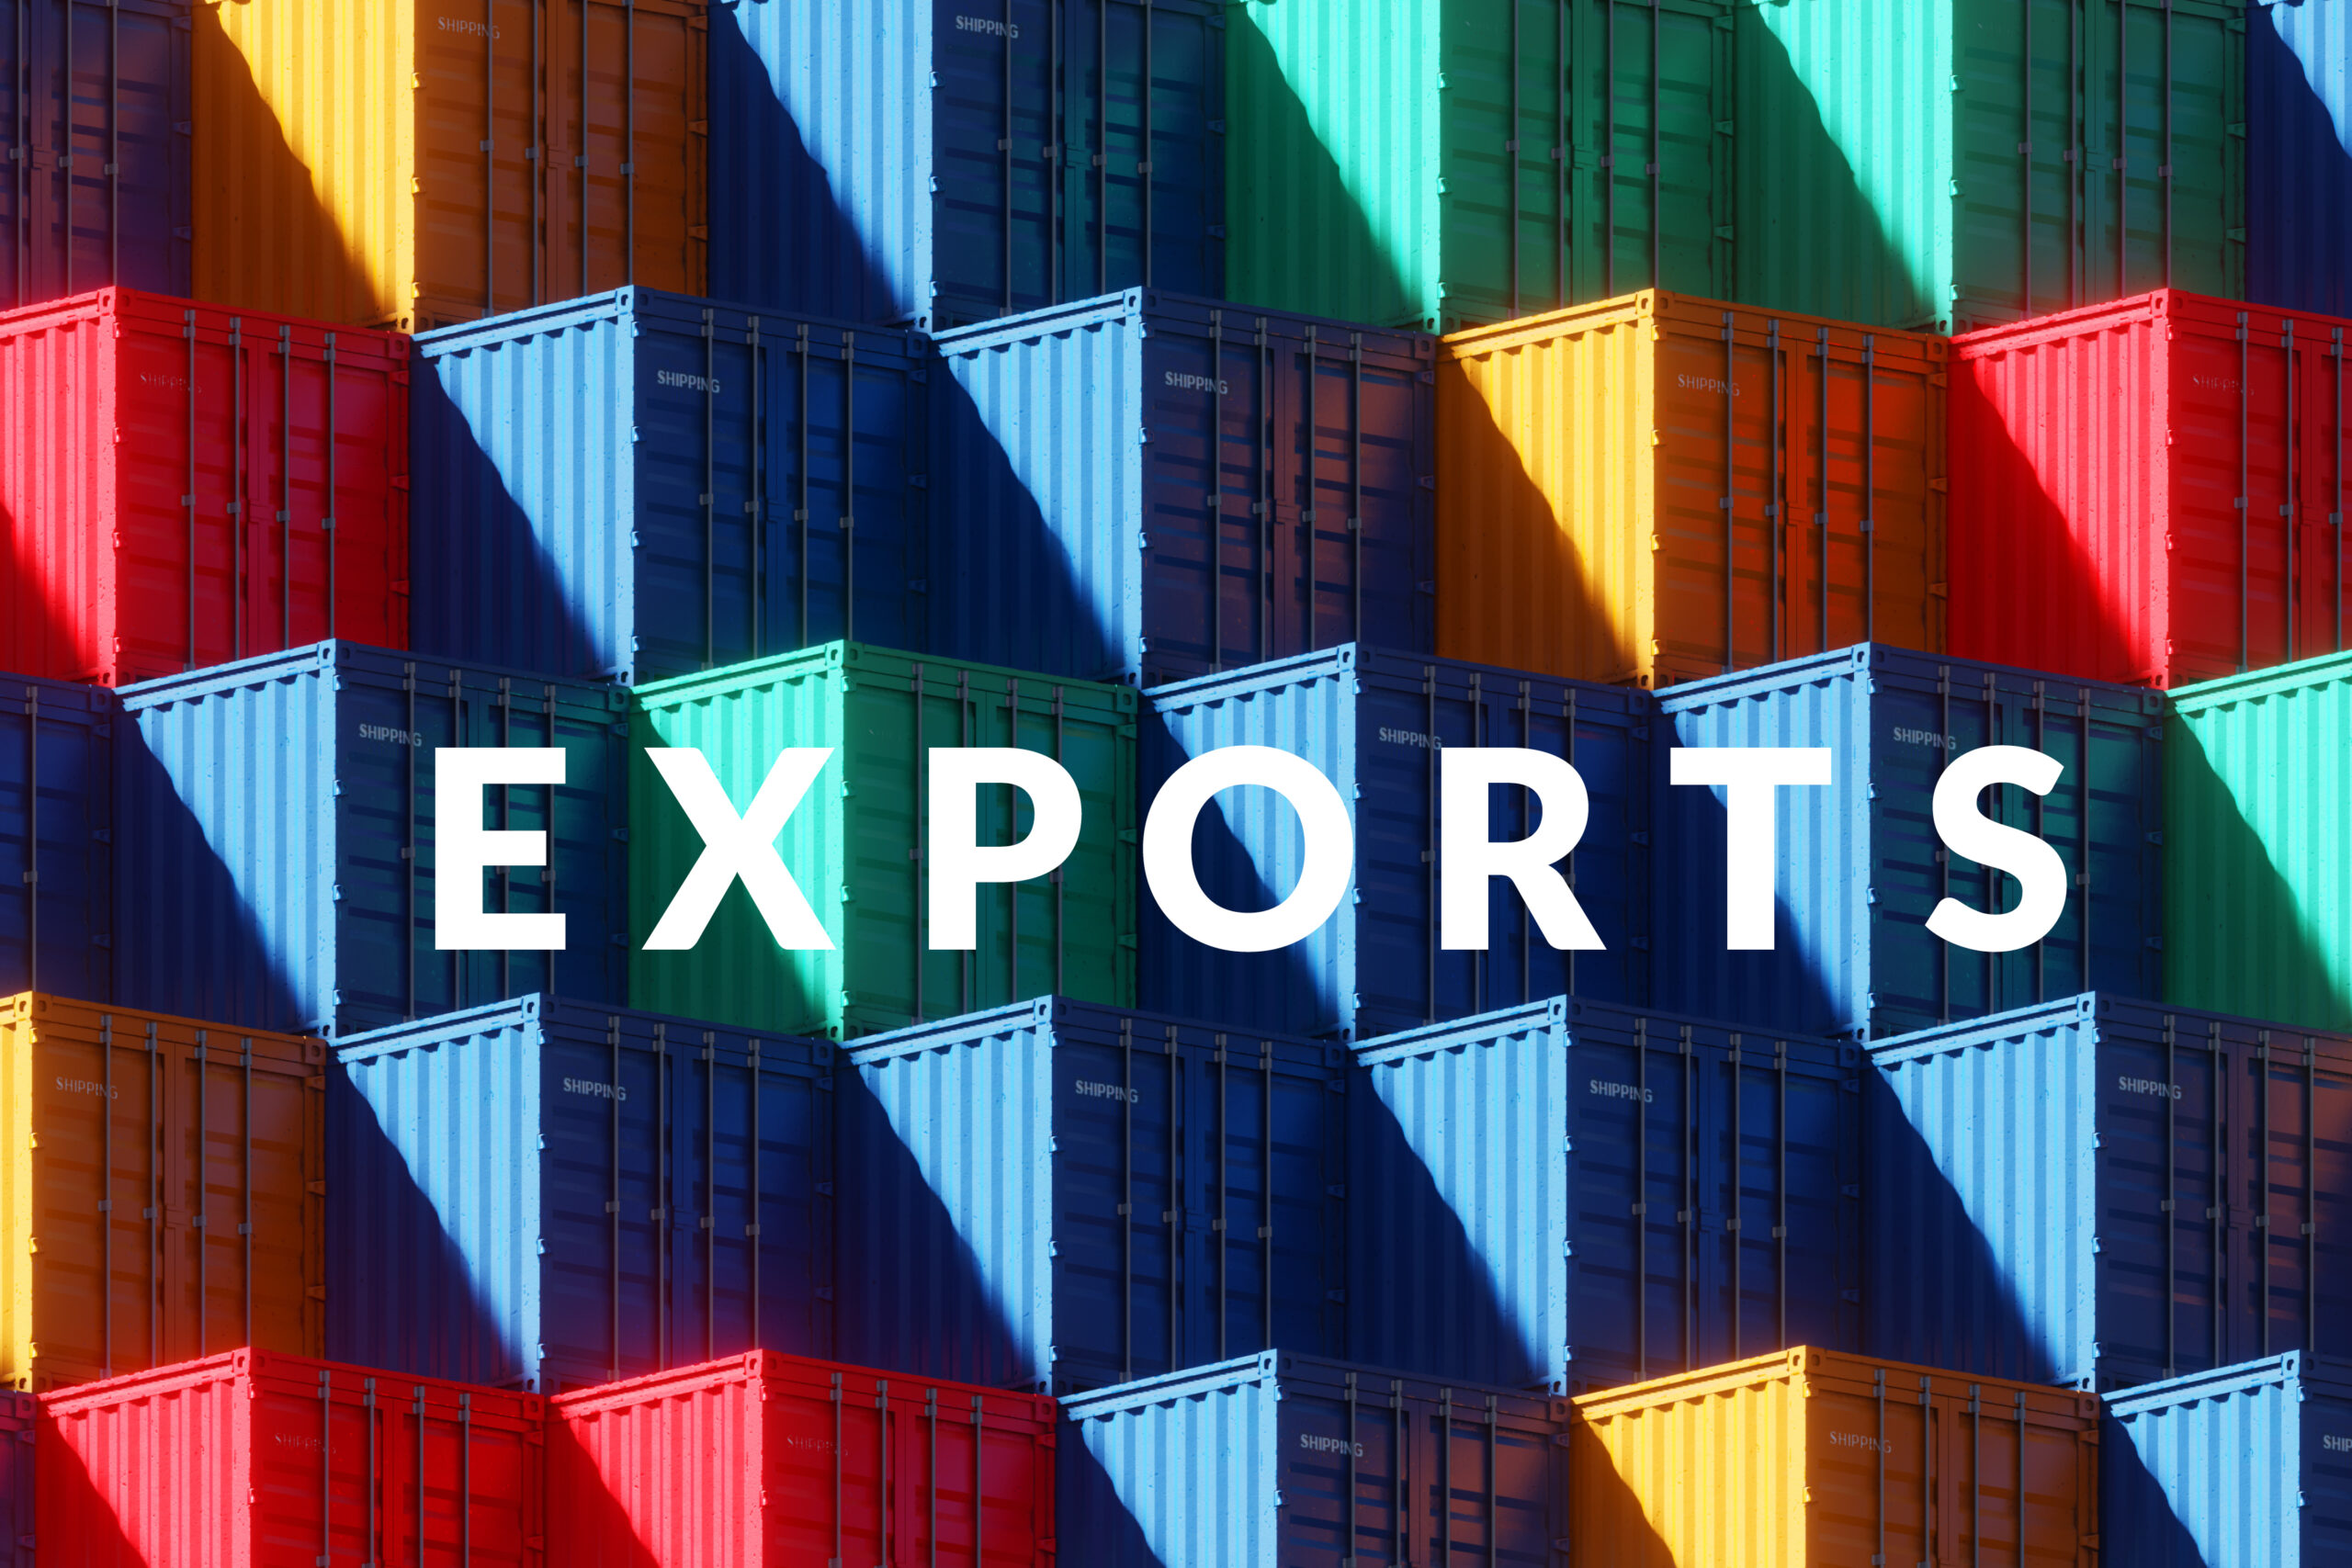 Colorful, stacked shipping containers prepared for exporting goods internationally for small businesses